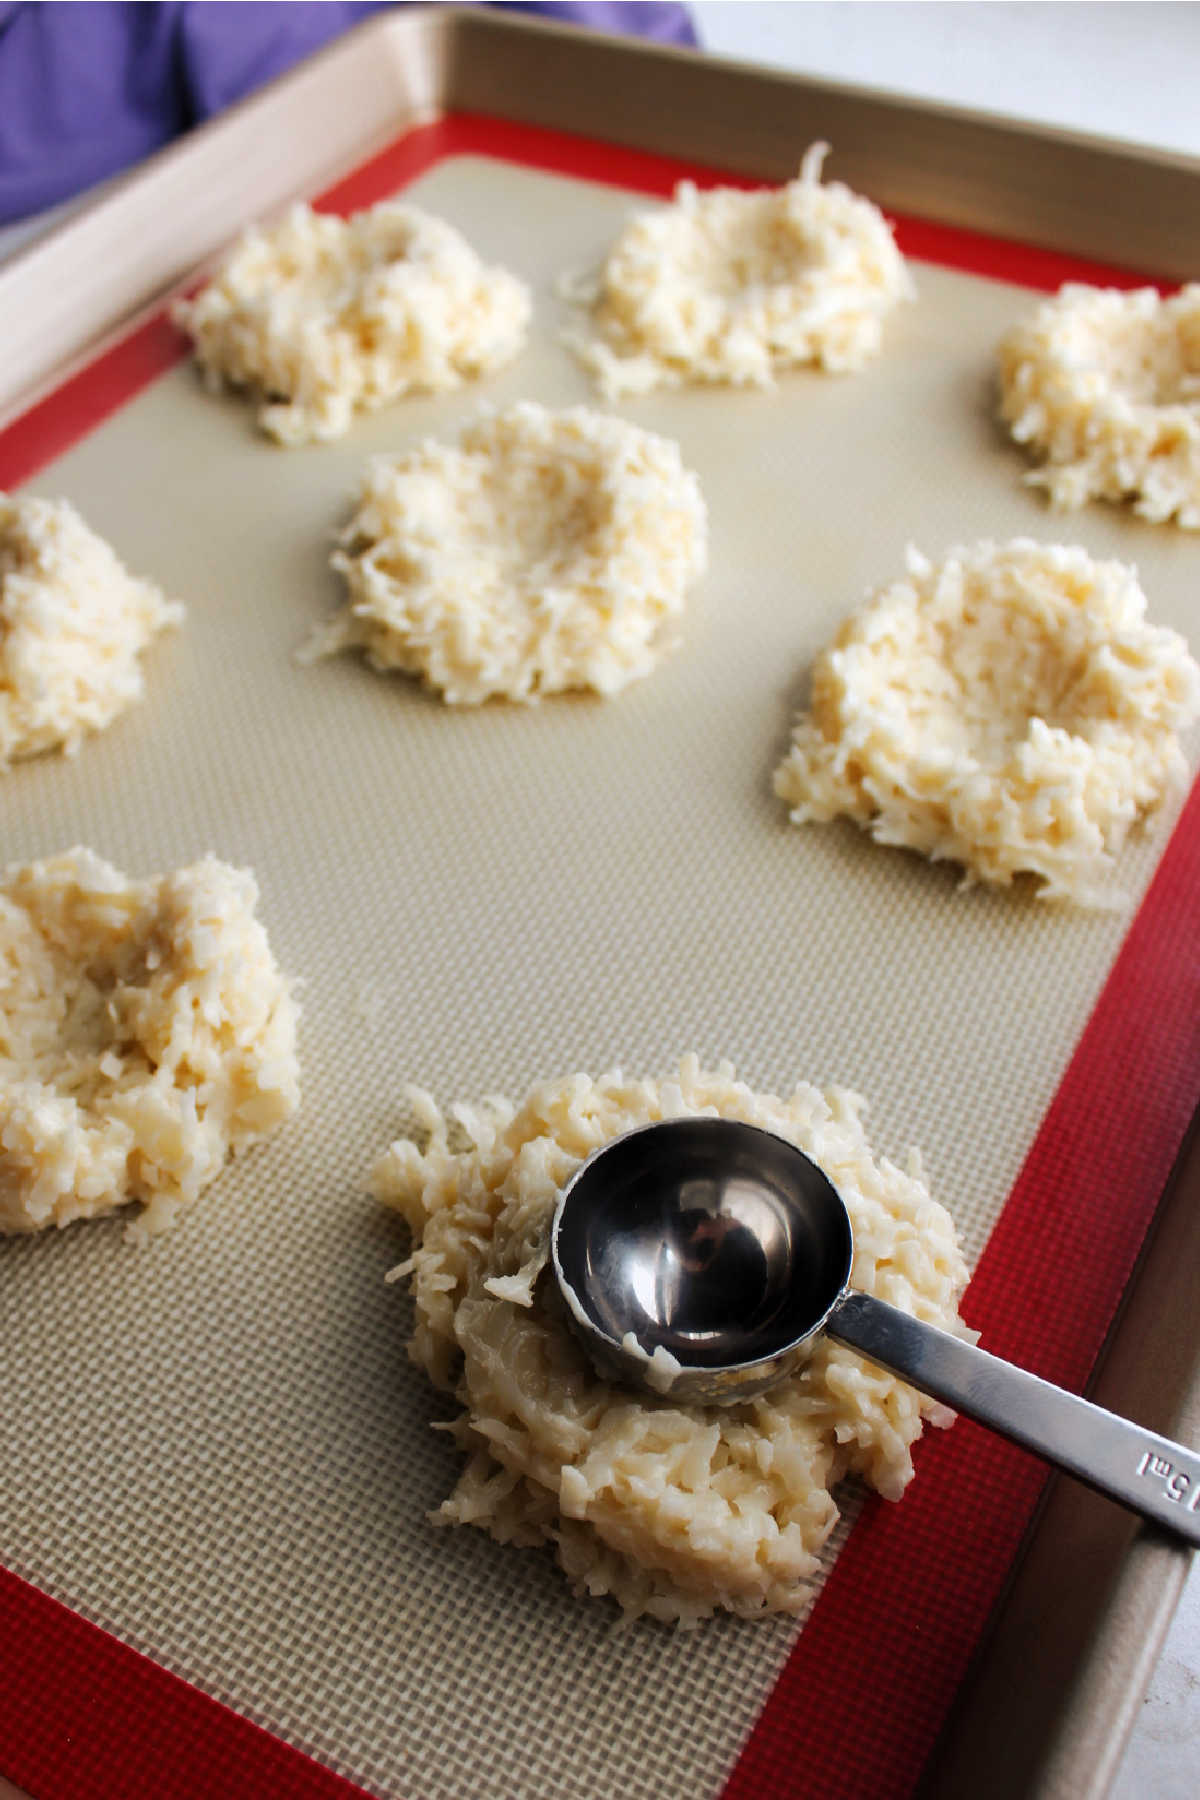 Pressing Tablespoon into the middle of a mound of coconut macaroon dough to make it a nest shape before it bakes.